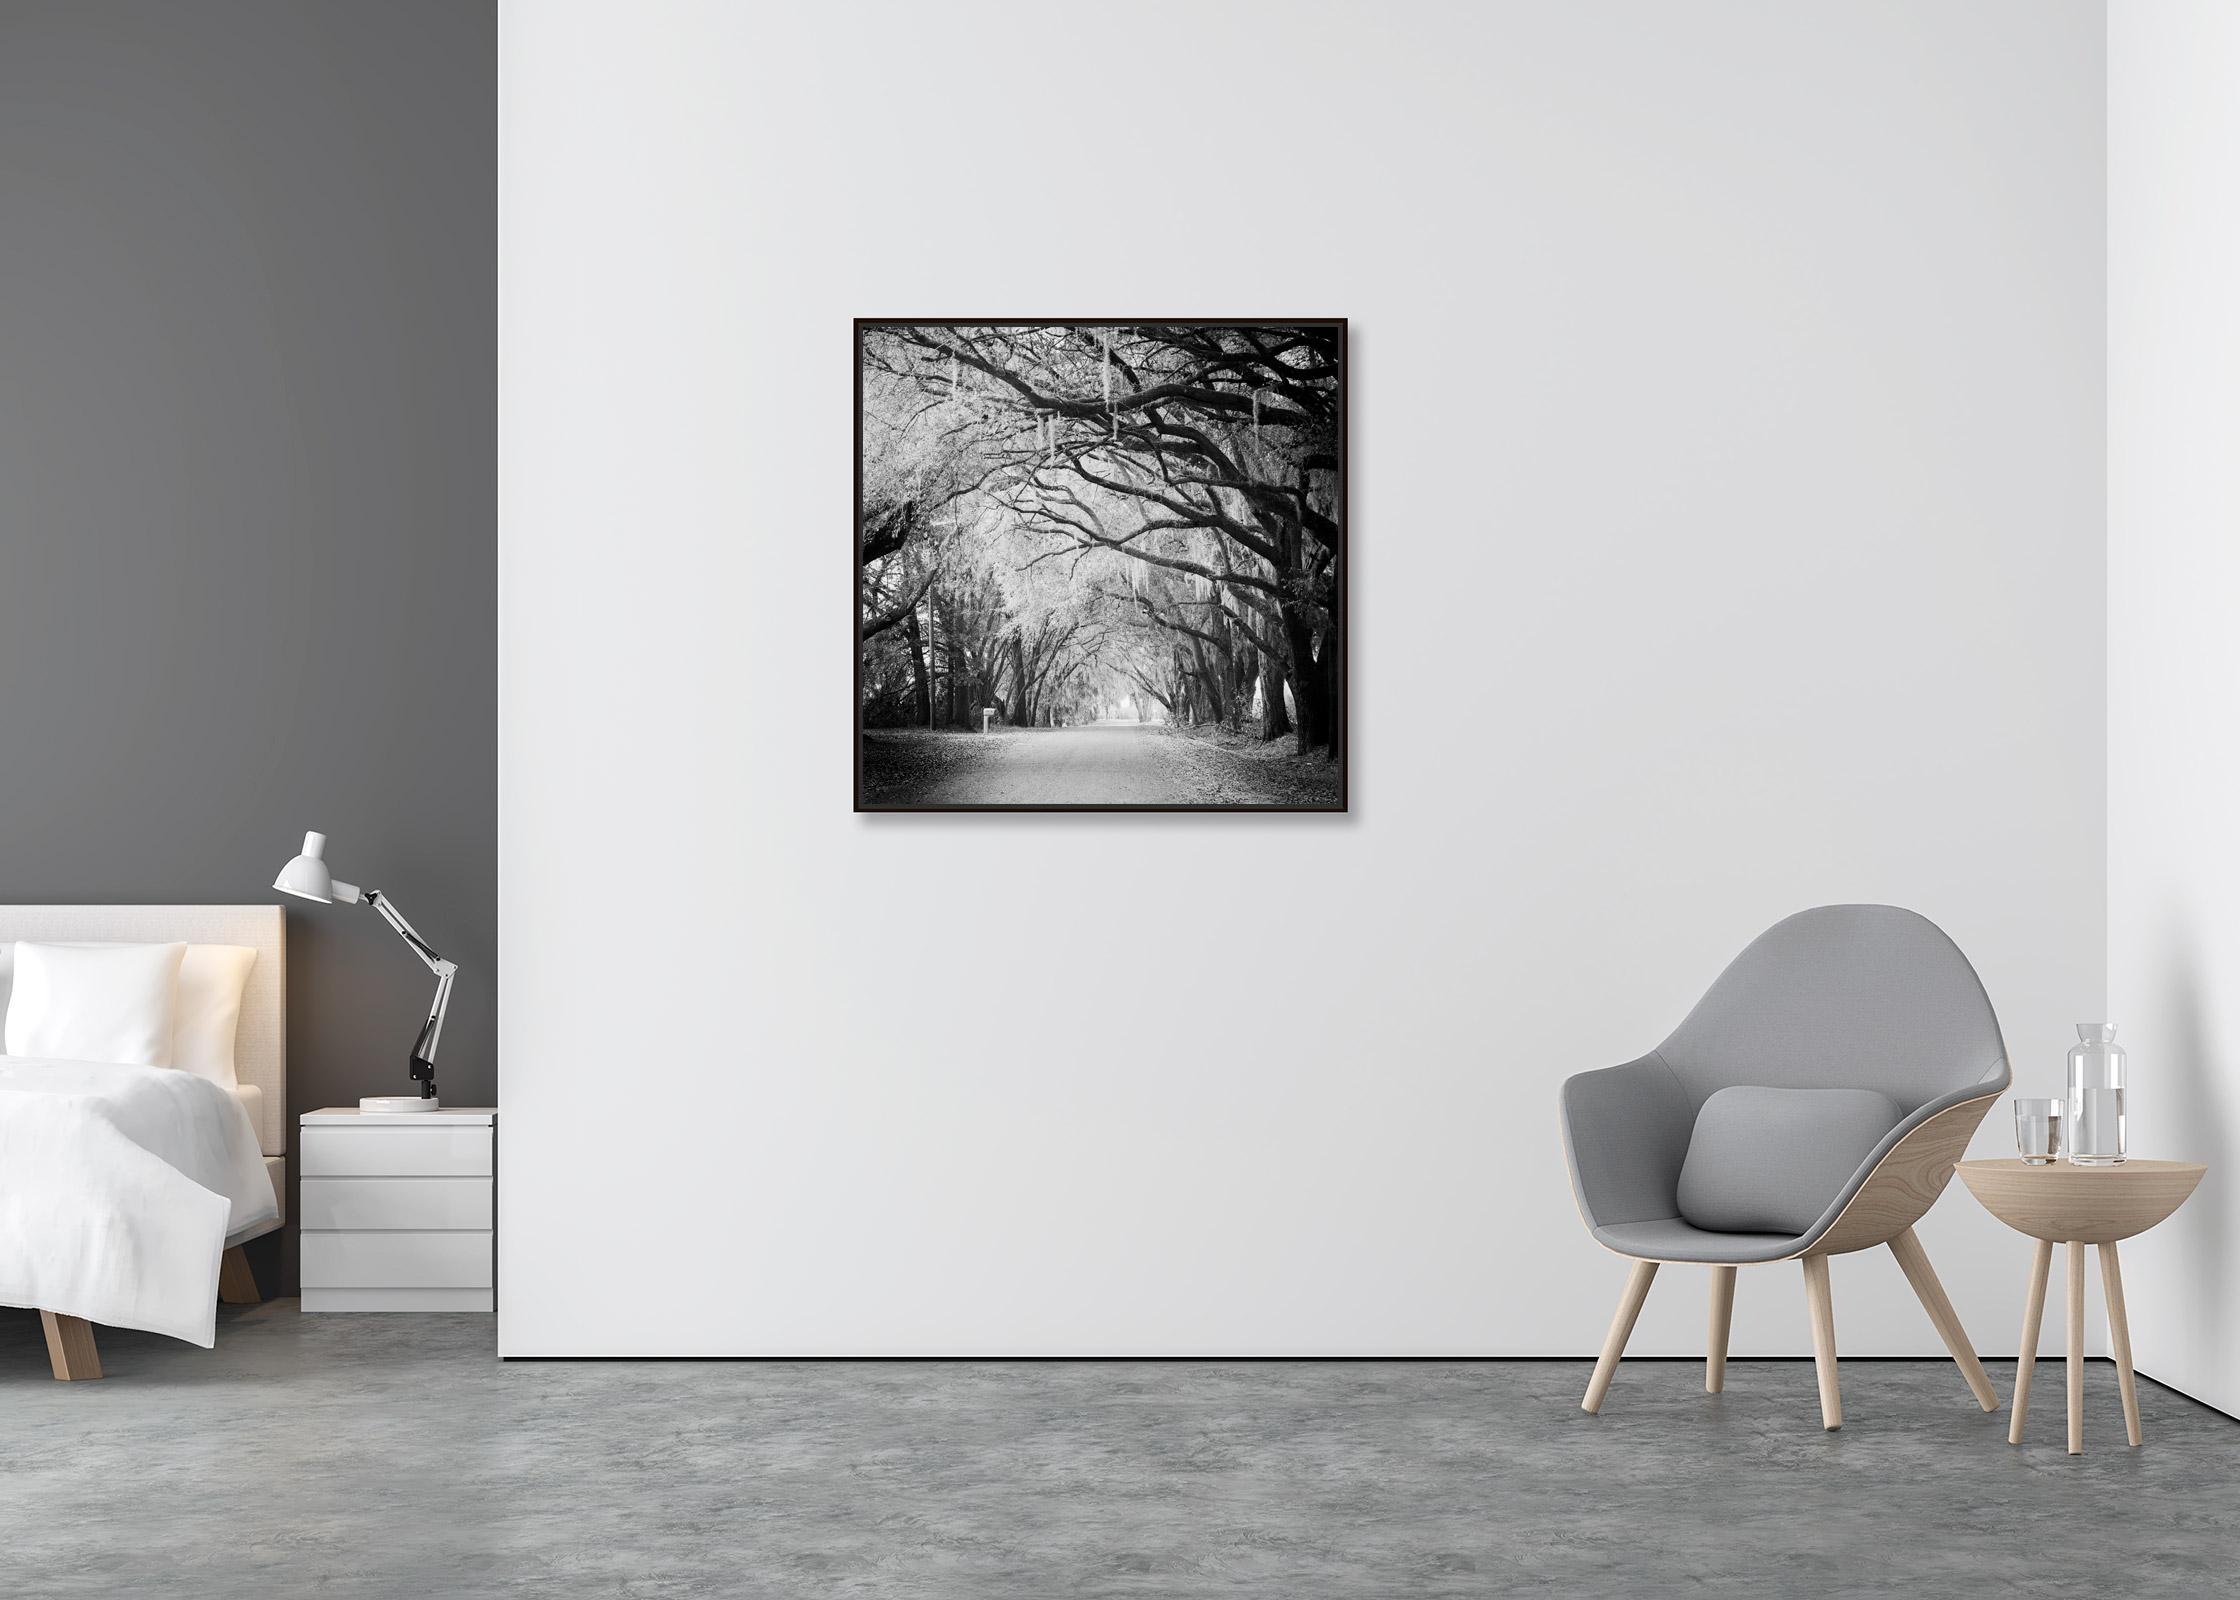 Fairytale Forest, Tree Avenue, Florida, black and white photography, landscape - Contemporary Photograph by Gerald Berghammer